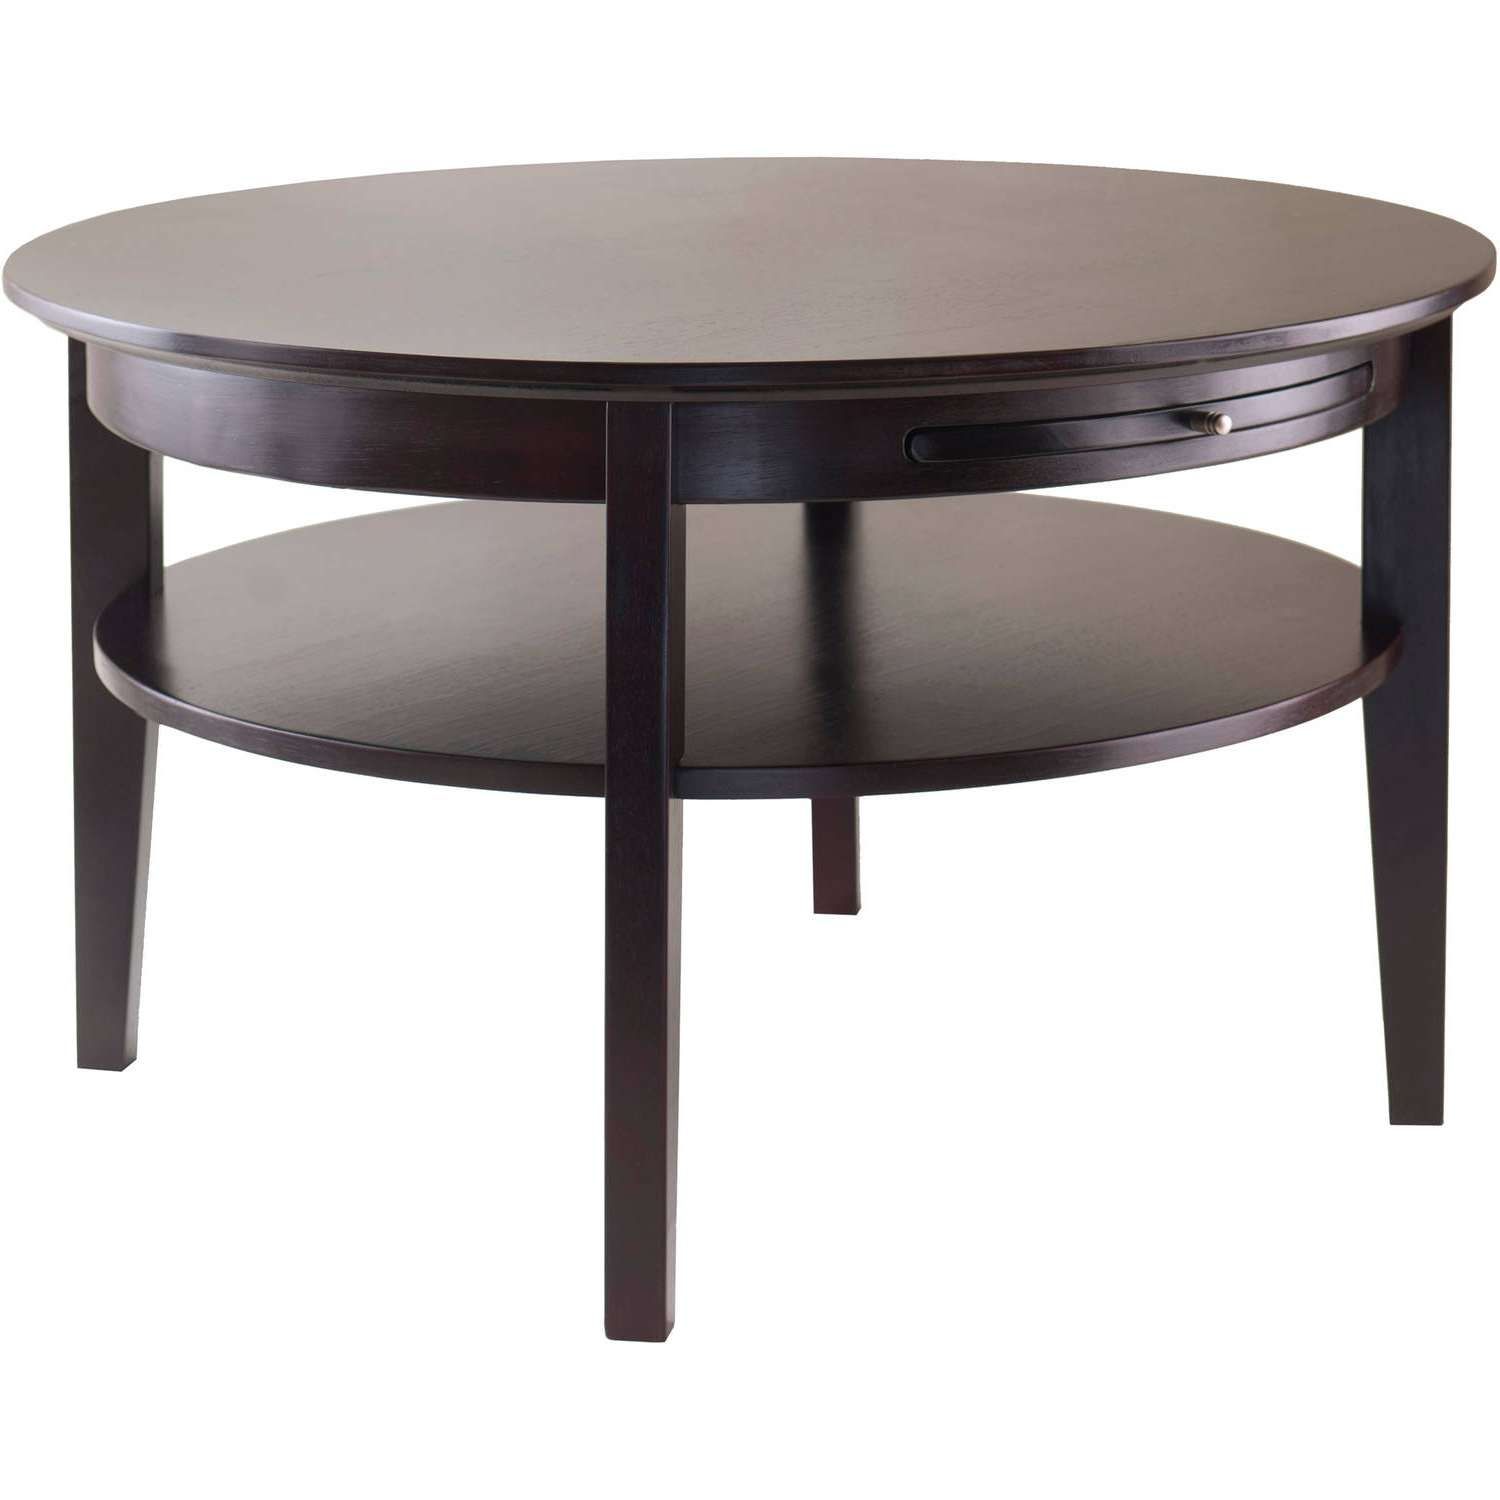 Amelia Round Coffee Table With Pull Out Tray, Espresso – Walmart Within Favorite Round Coffee Tables (View 13 of 20)